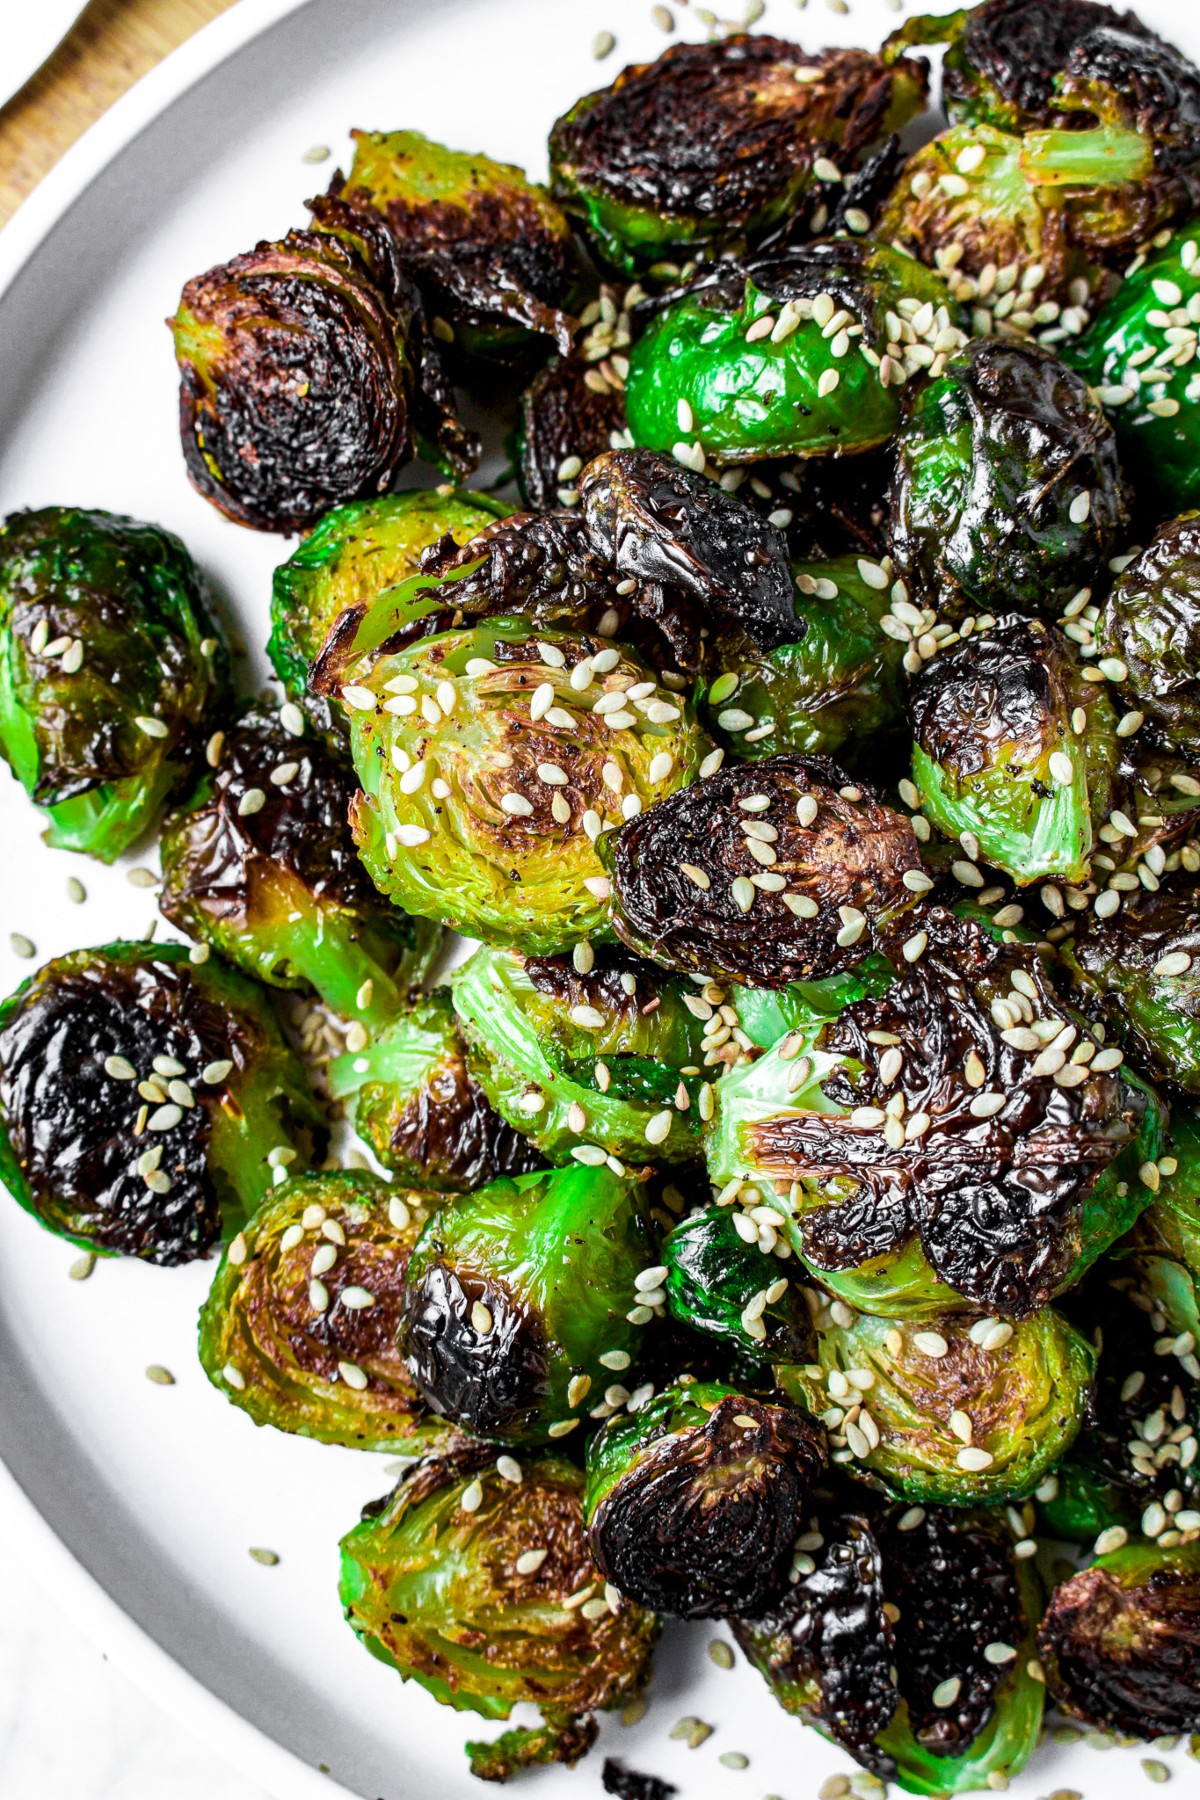 Overhead close up shot of a pile of oven-roasted brussel sprouts sprinkled with white sesame seeds